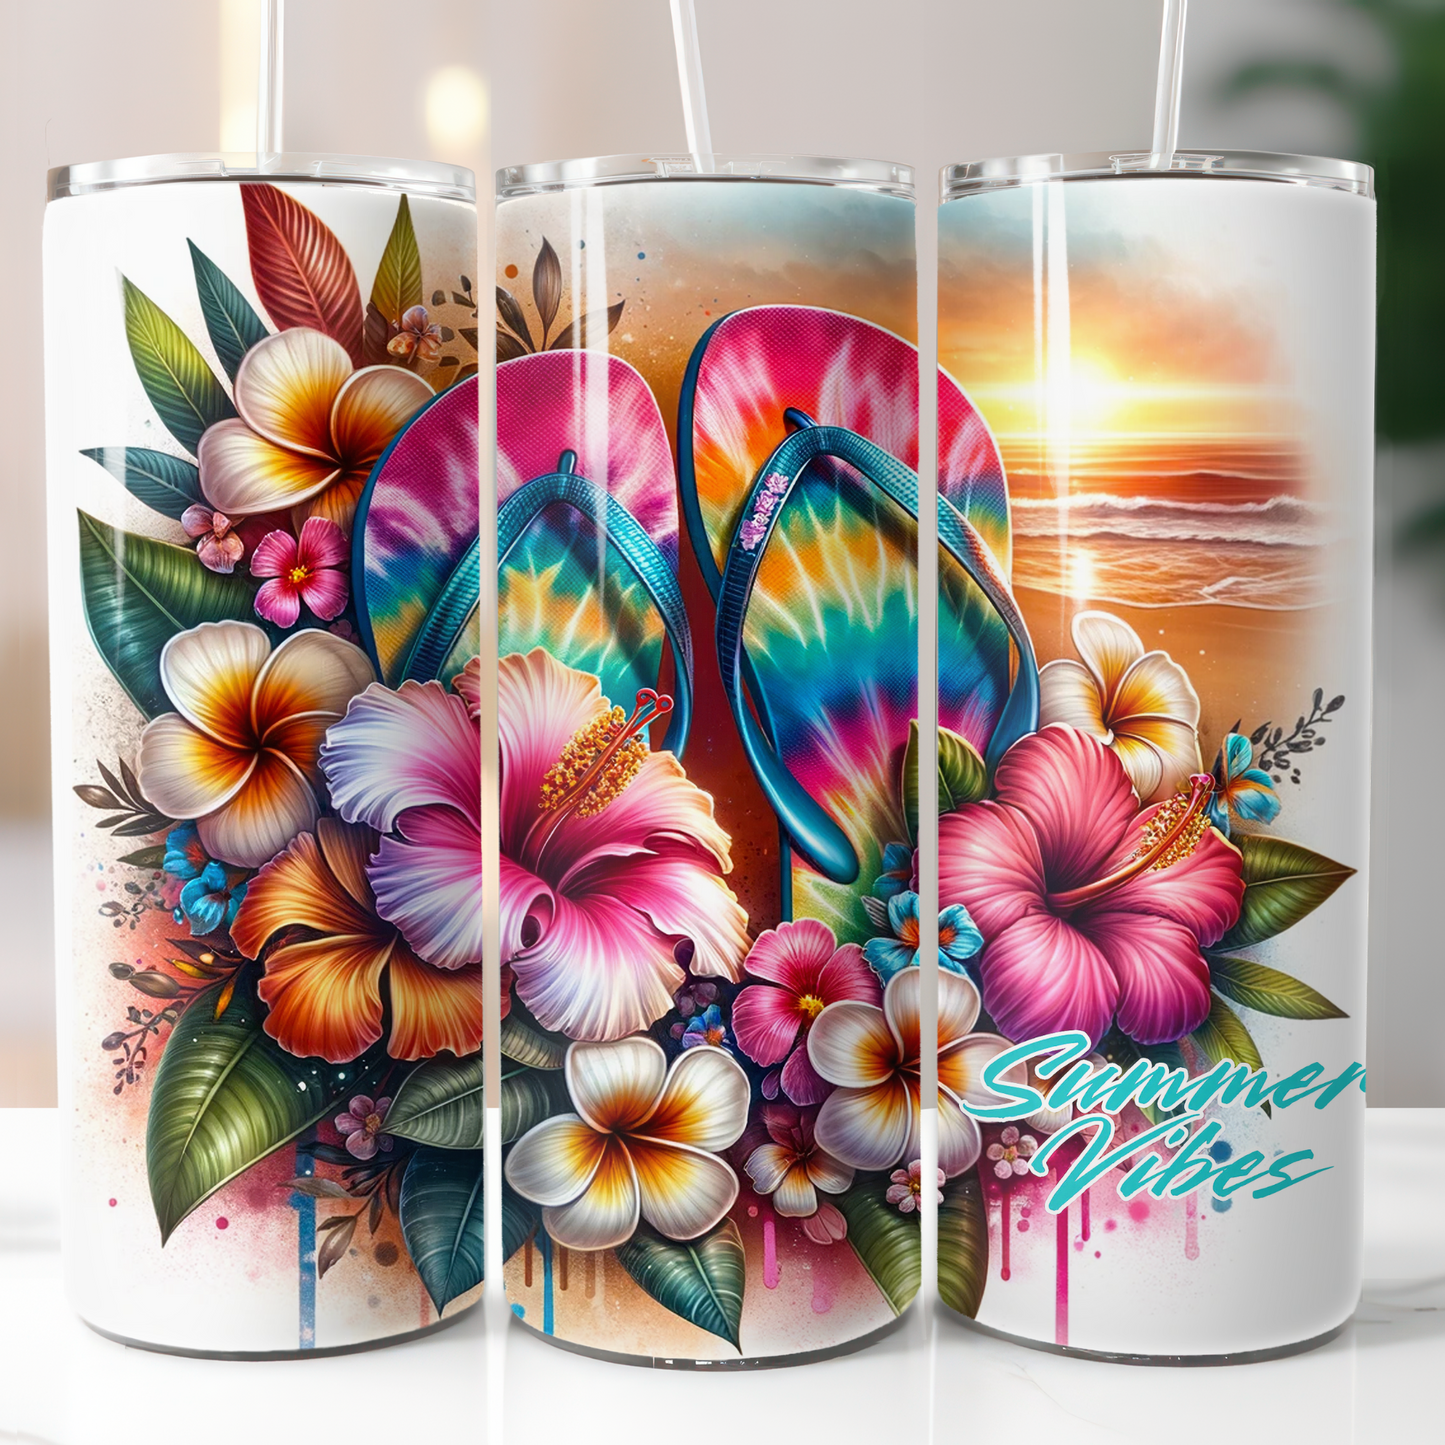 Summer Vibes, Sublimation Transfer